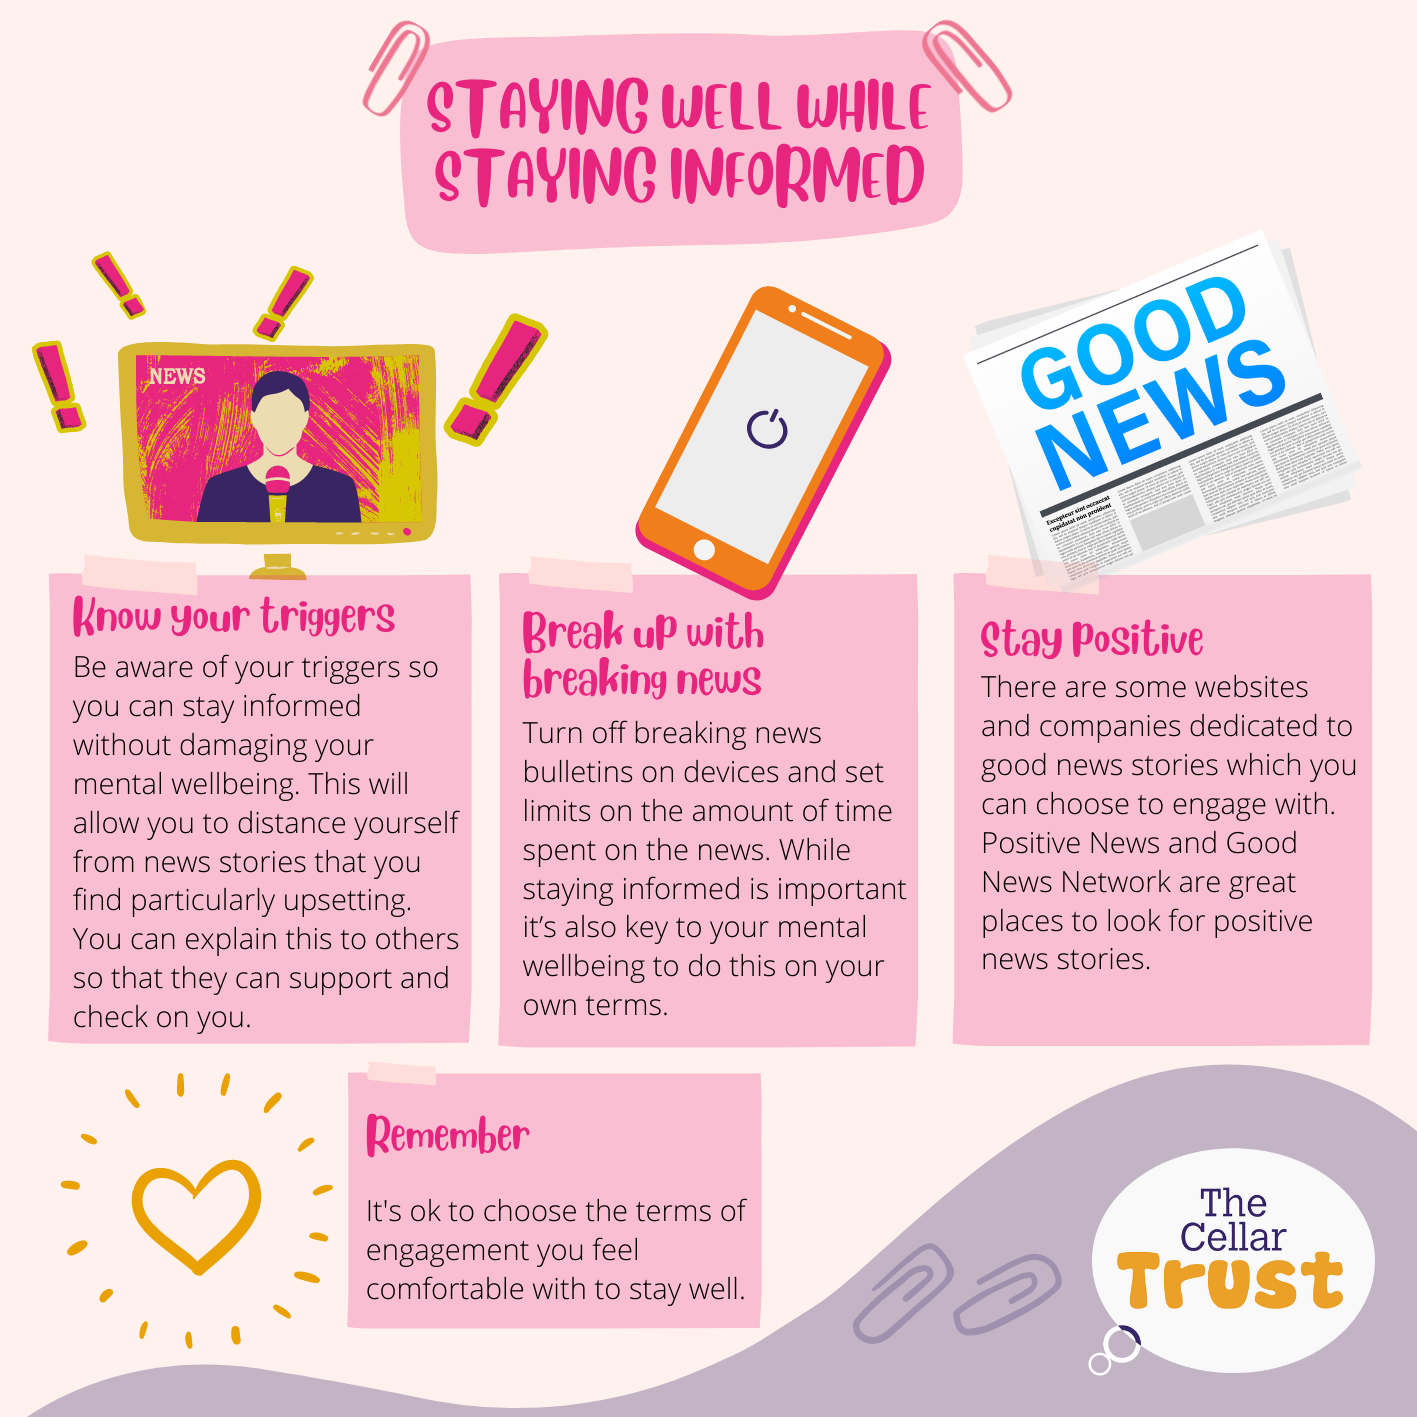 Our infographic shows how you can stay well while staying informed